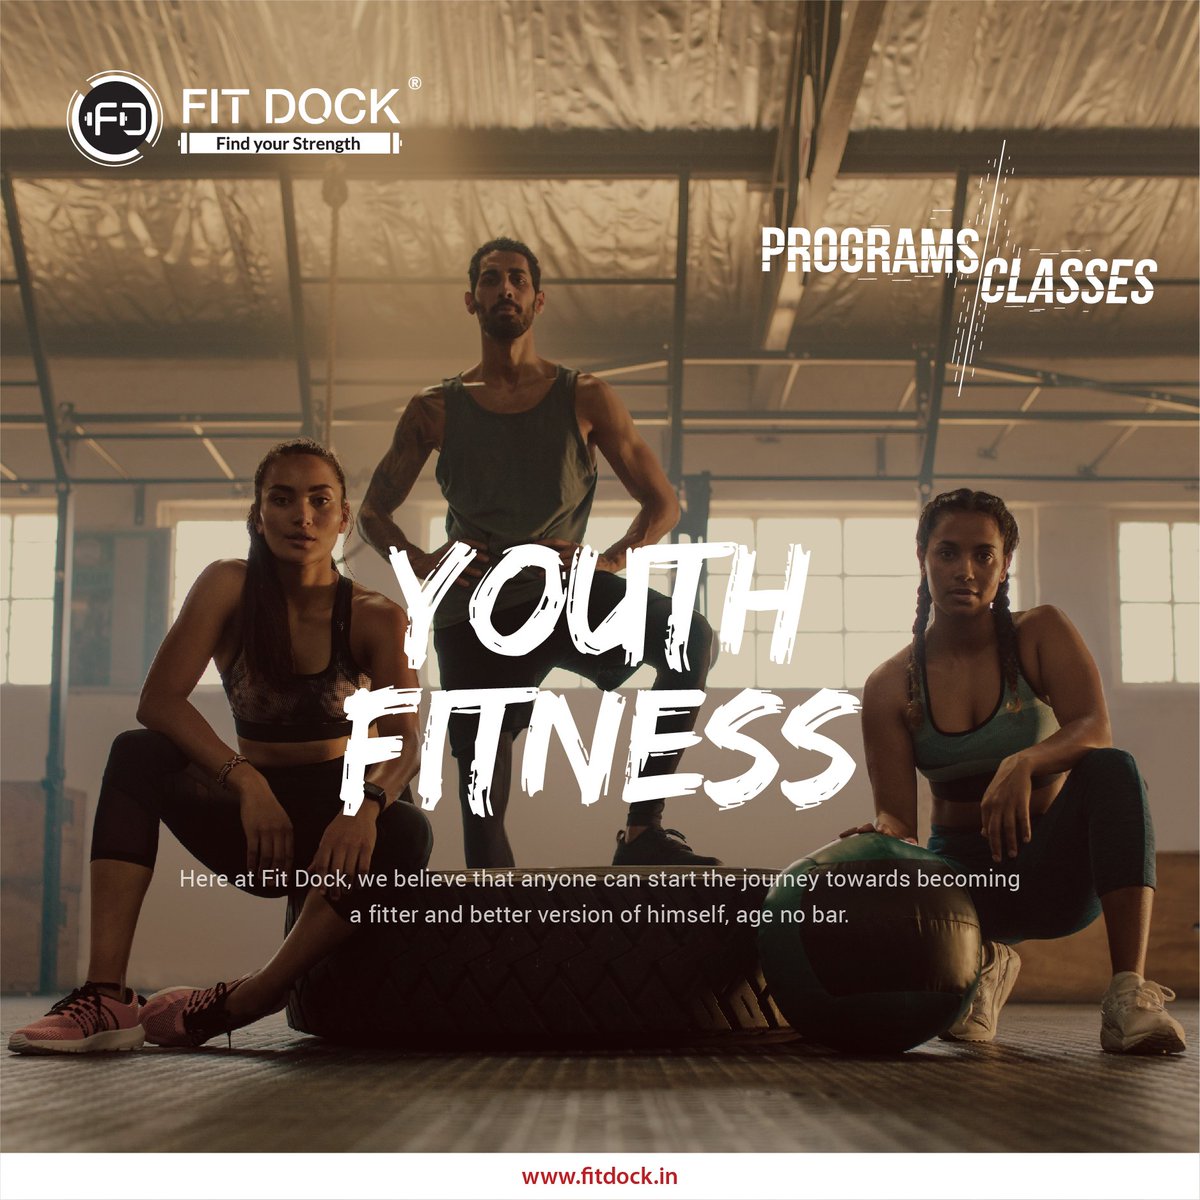 Programs and Classes

Youth Fitness: Here at Fit Dock, we believe that anyone can start the journey towards becoming a fitter and better version of himself, age no bar.

#YouthFitness #Fitness #FitnessJourney #ExerciseTips #StrengthTraining #WorkoutSecrets #ExpertExerciseTips